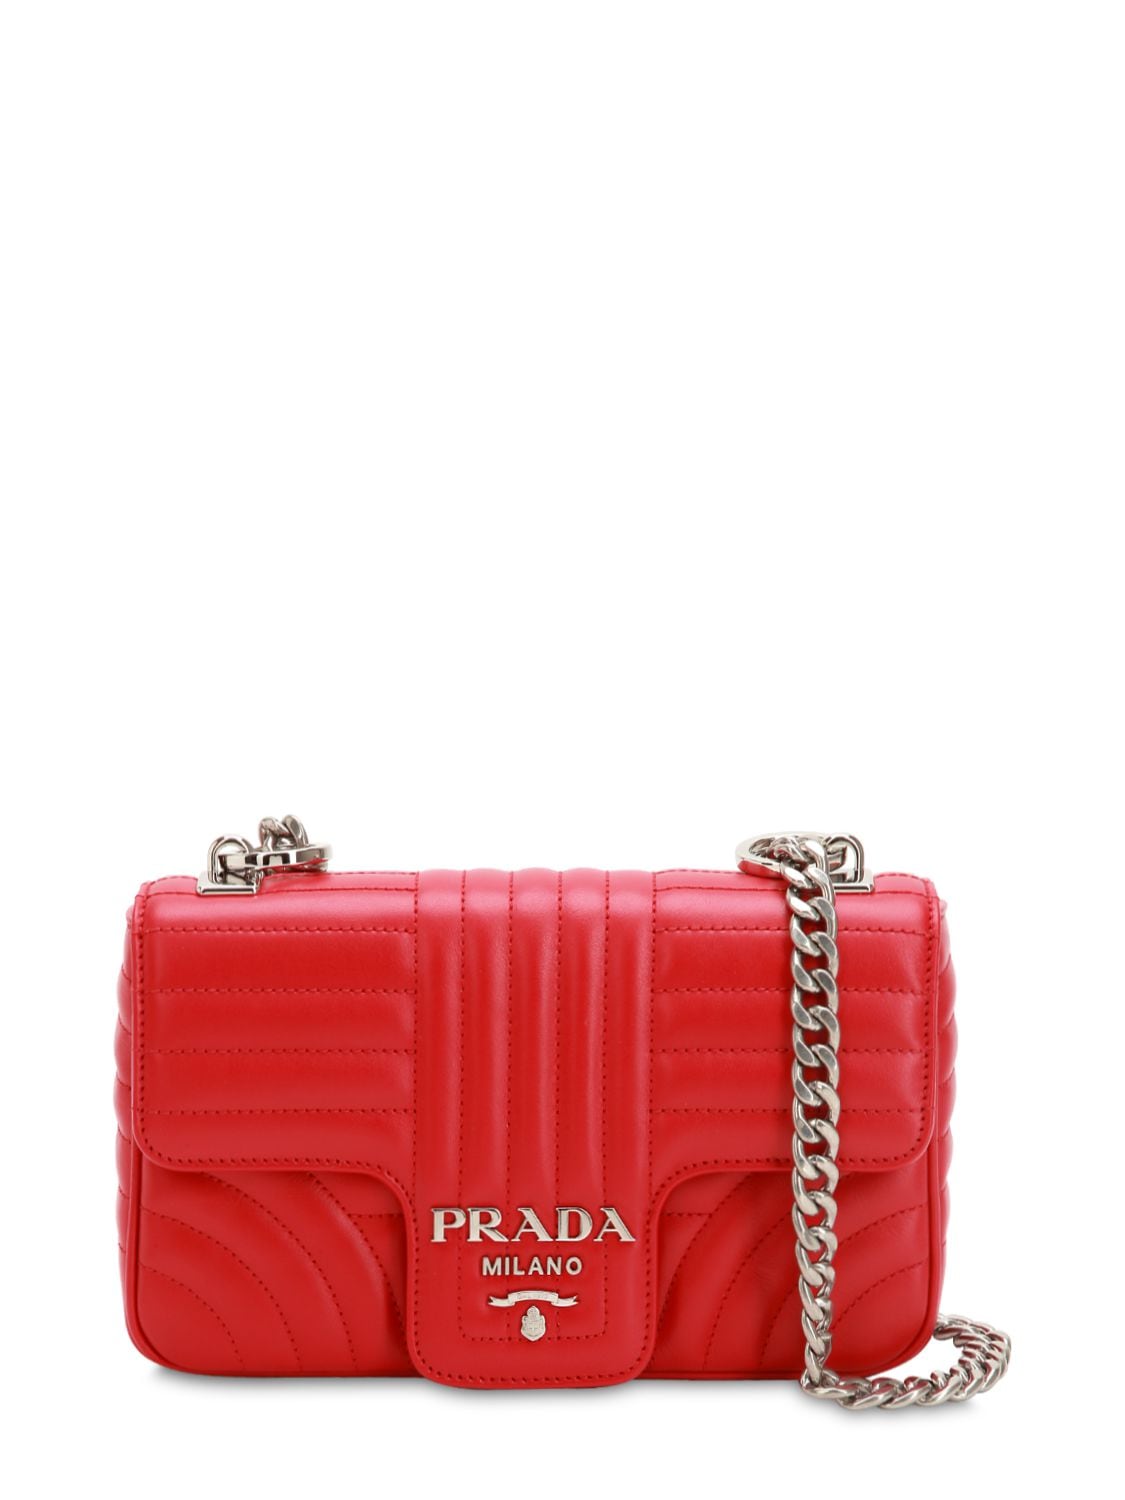 PRADA SMALL QUILTED SOFT LEATHER SHOULDER BAG,68I5CP002-RJAWMTE1